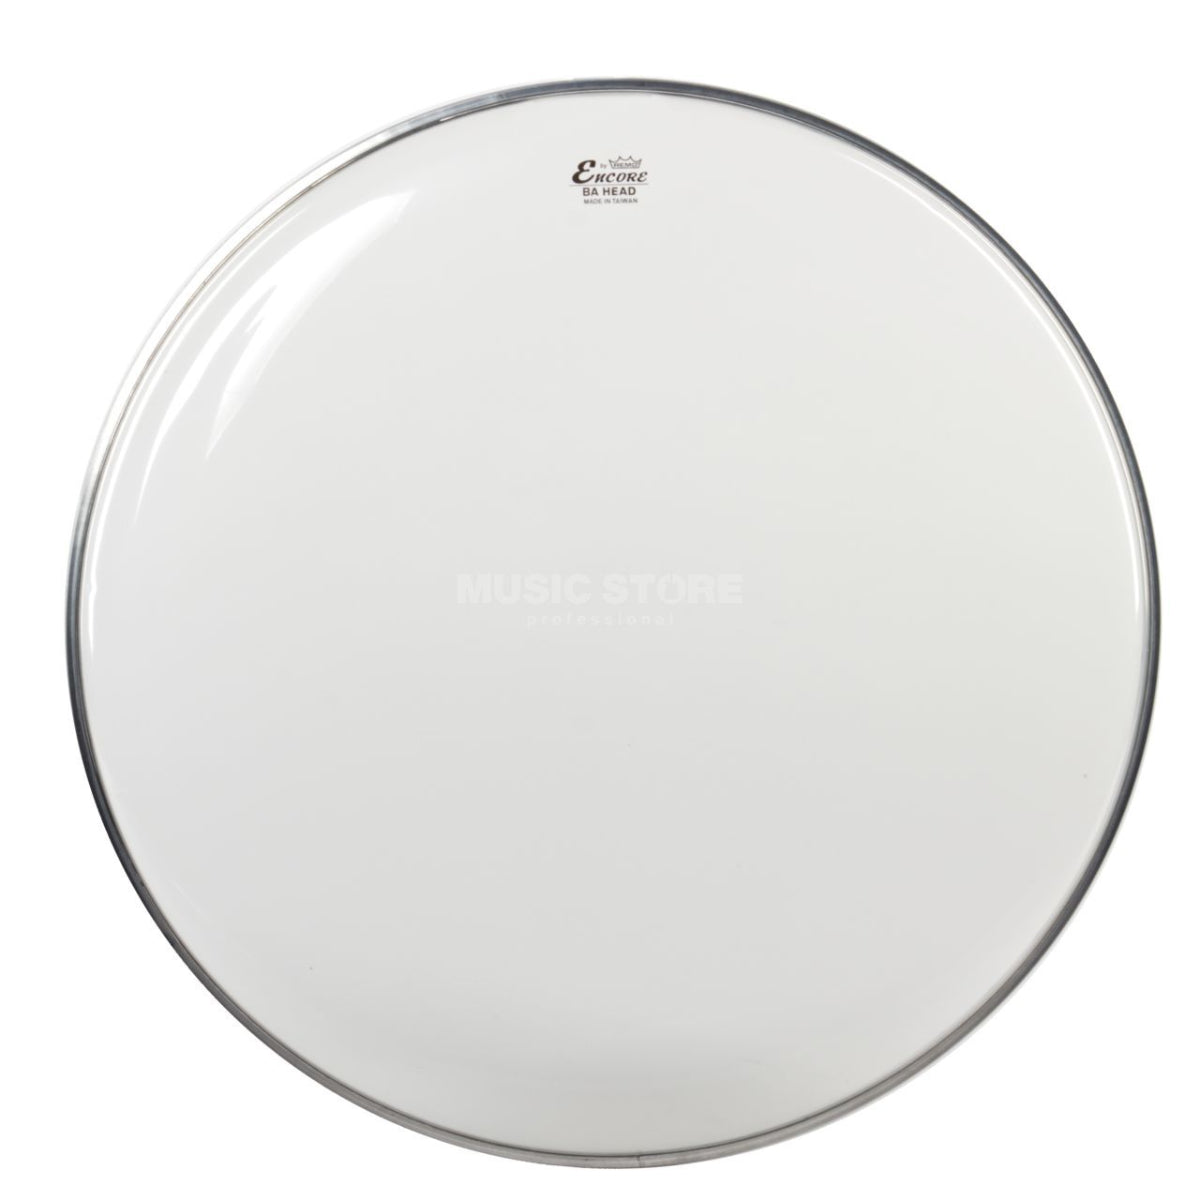 Mặt Trống Remo BA-0316-00 16inch Ambassador Clear Drum Head - Việt Music